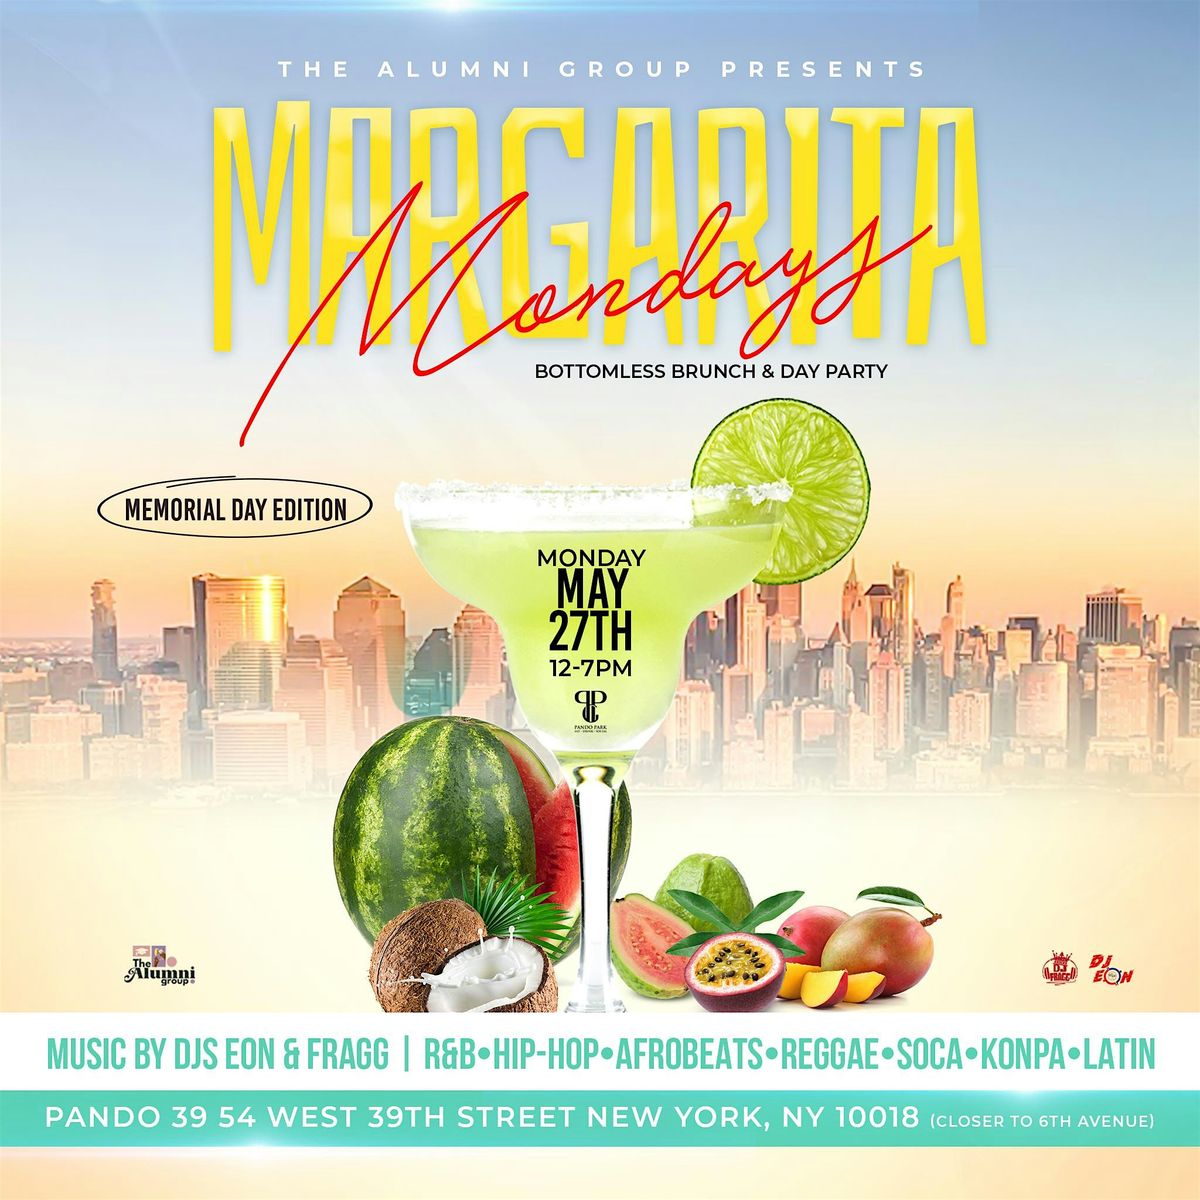 Margarita Monday - Bottomless Brunch & Day Party Memorial Day